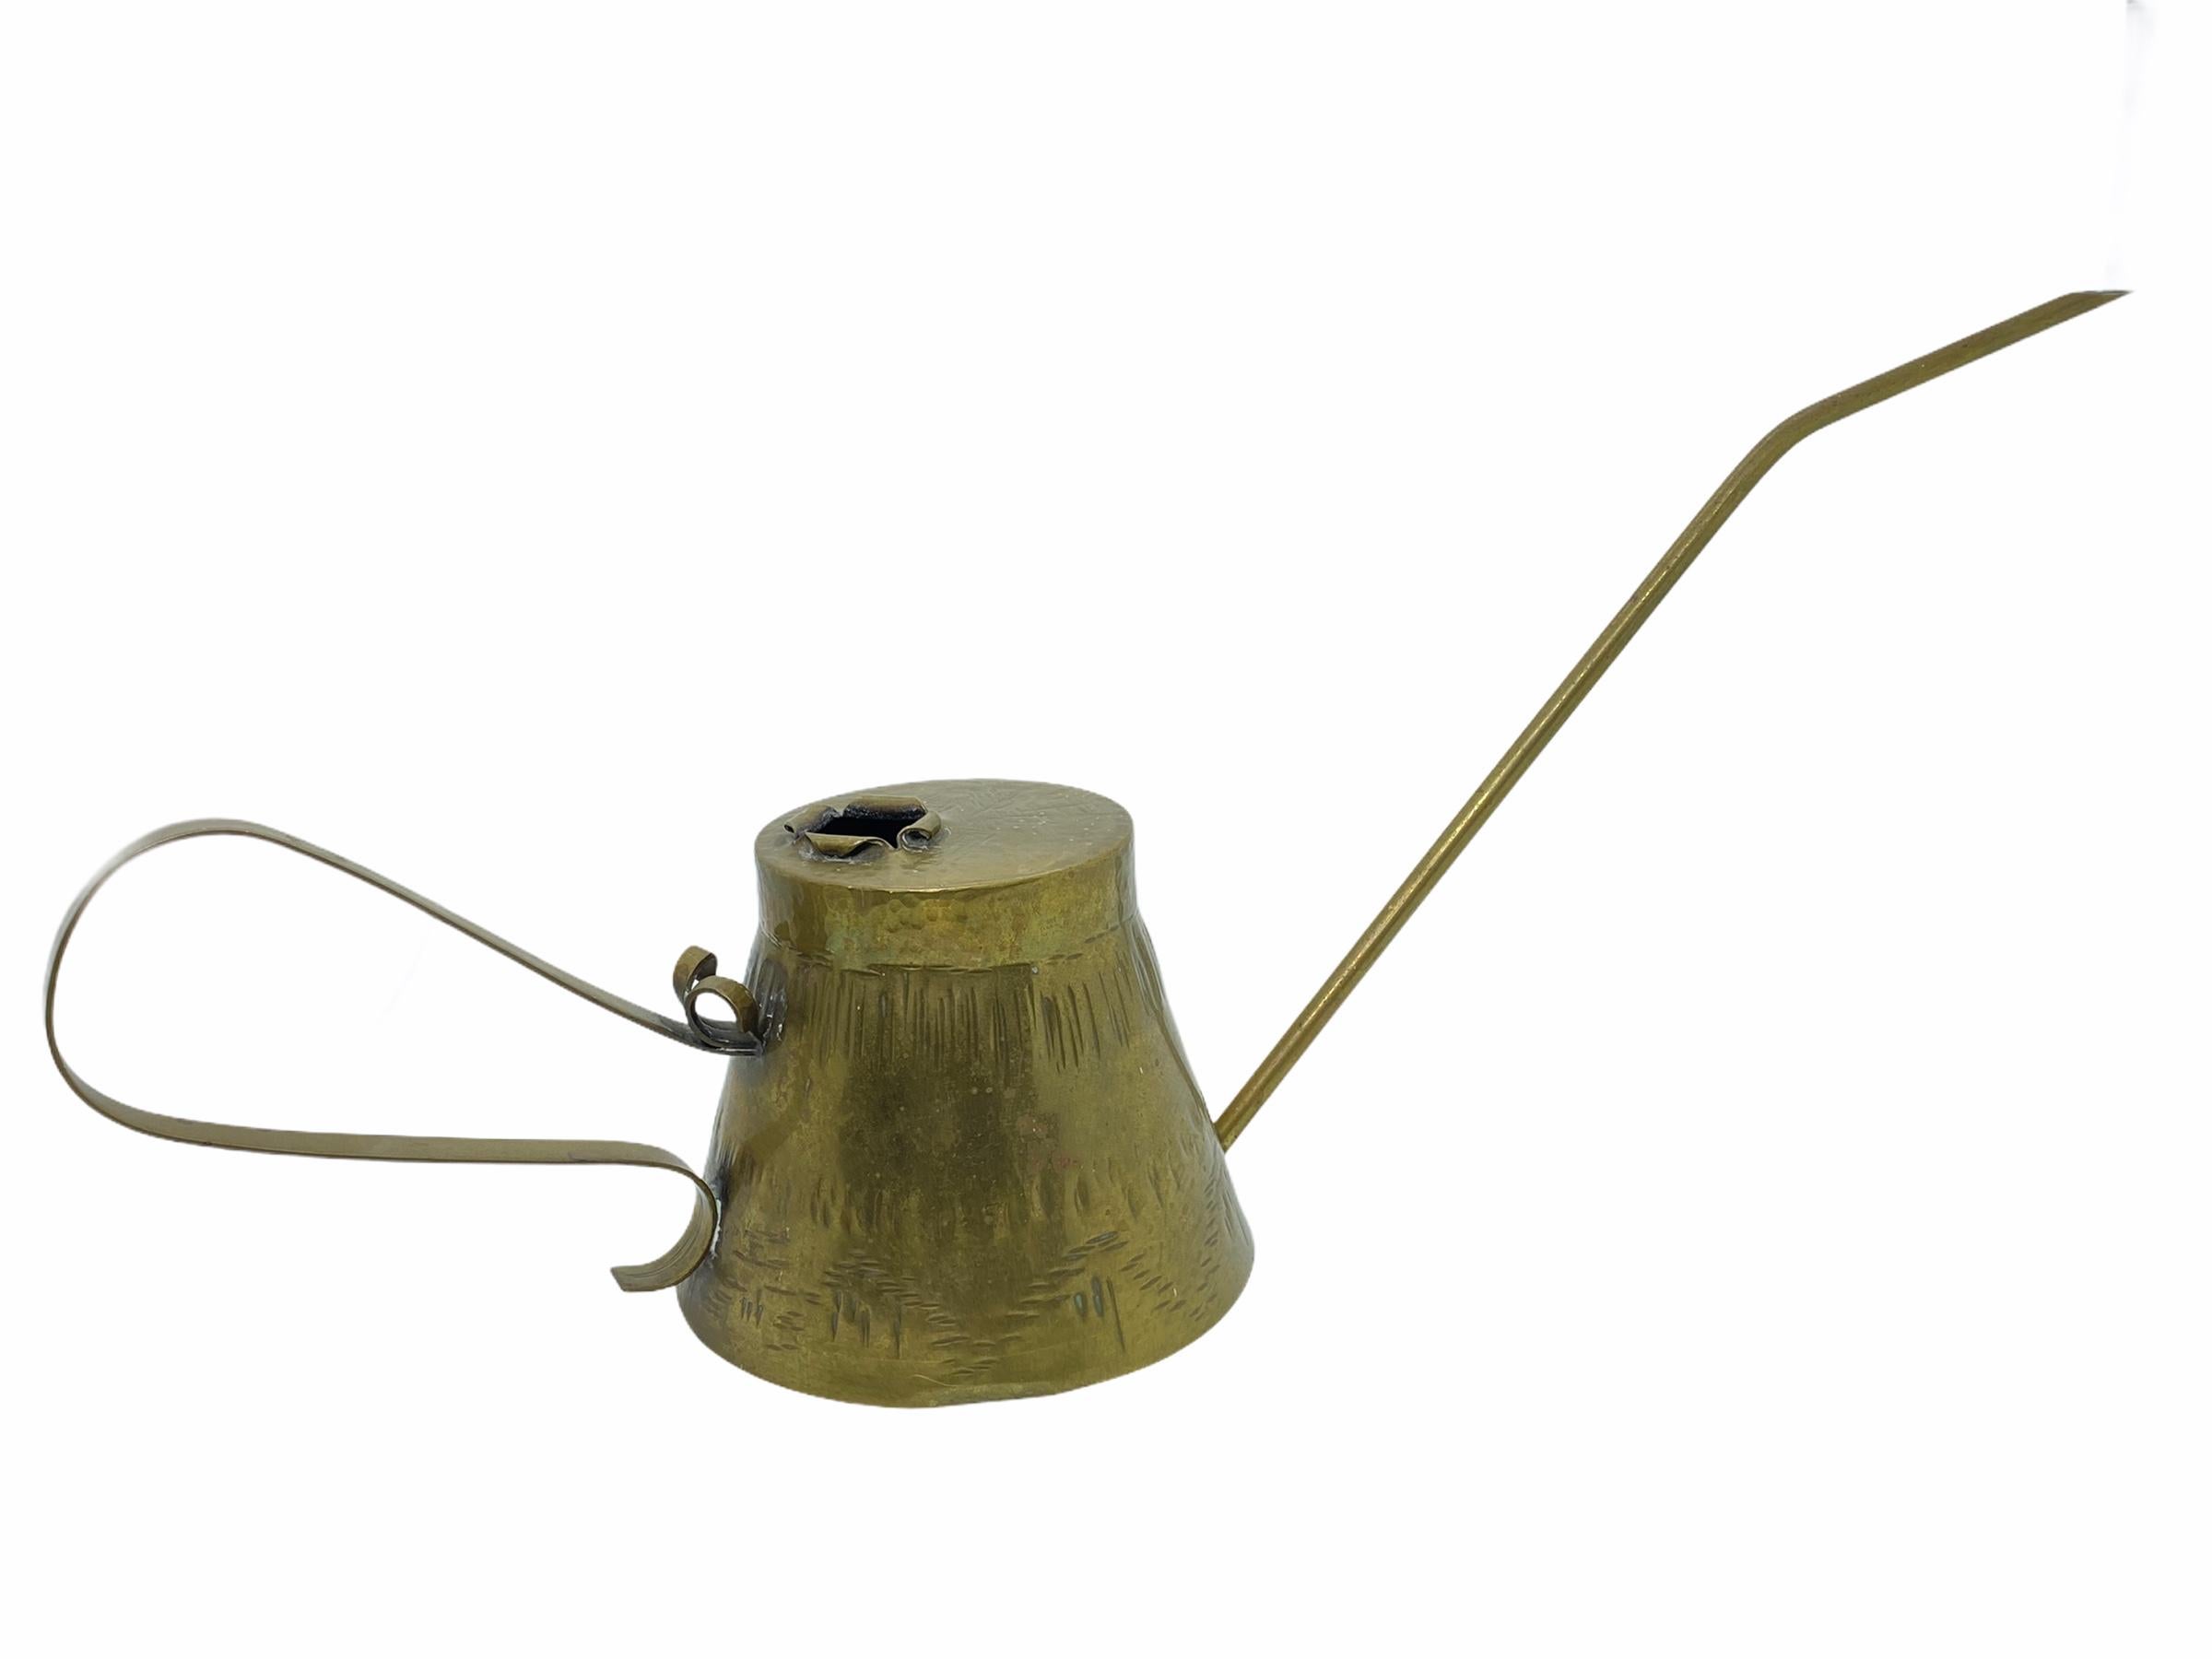 A gorgeous vintage Mid-Century Modern brass watering can with a long spout. Great lines, great original condition with wonderful patina.